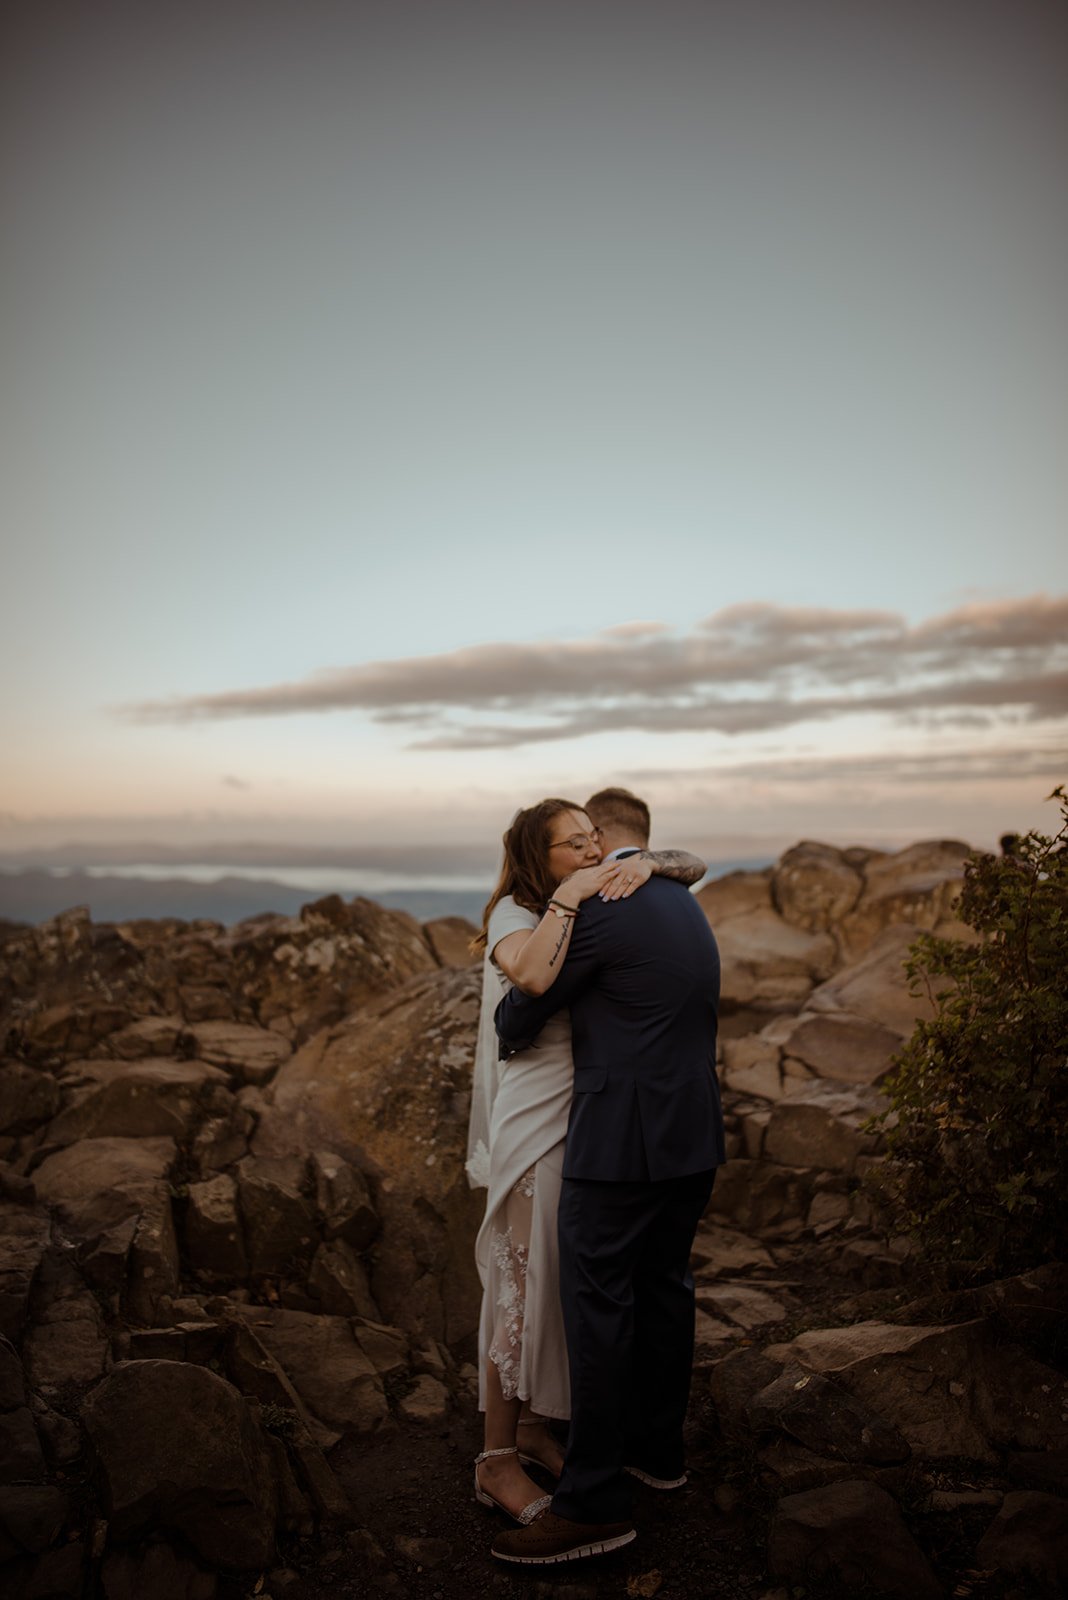 Shenandoah National Park Hiking Elopement with Guests - White Sails Creative_56.jpg